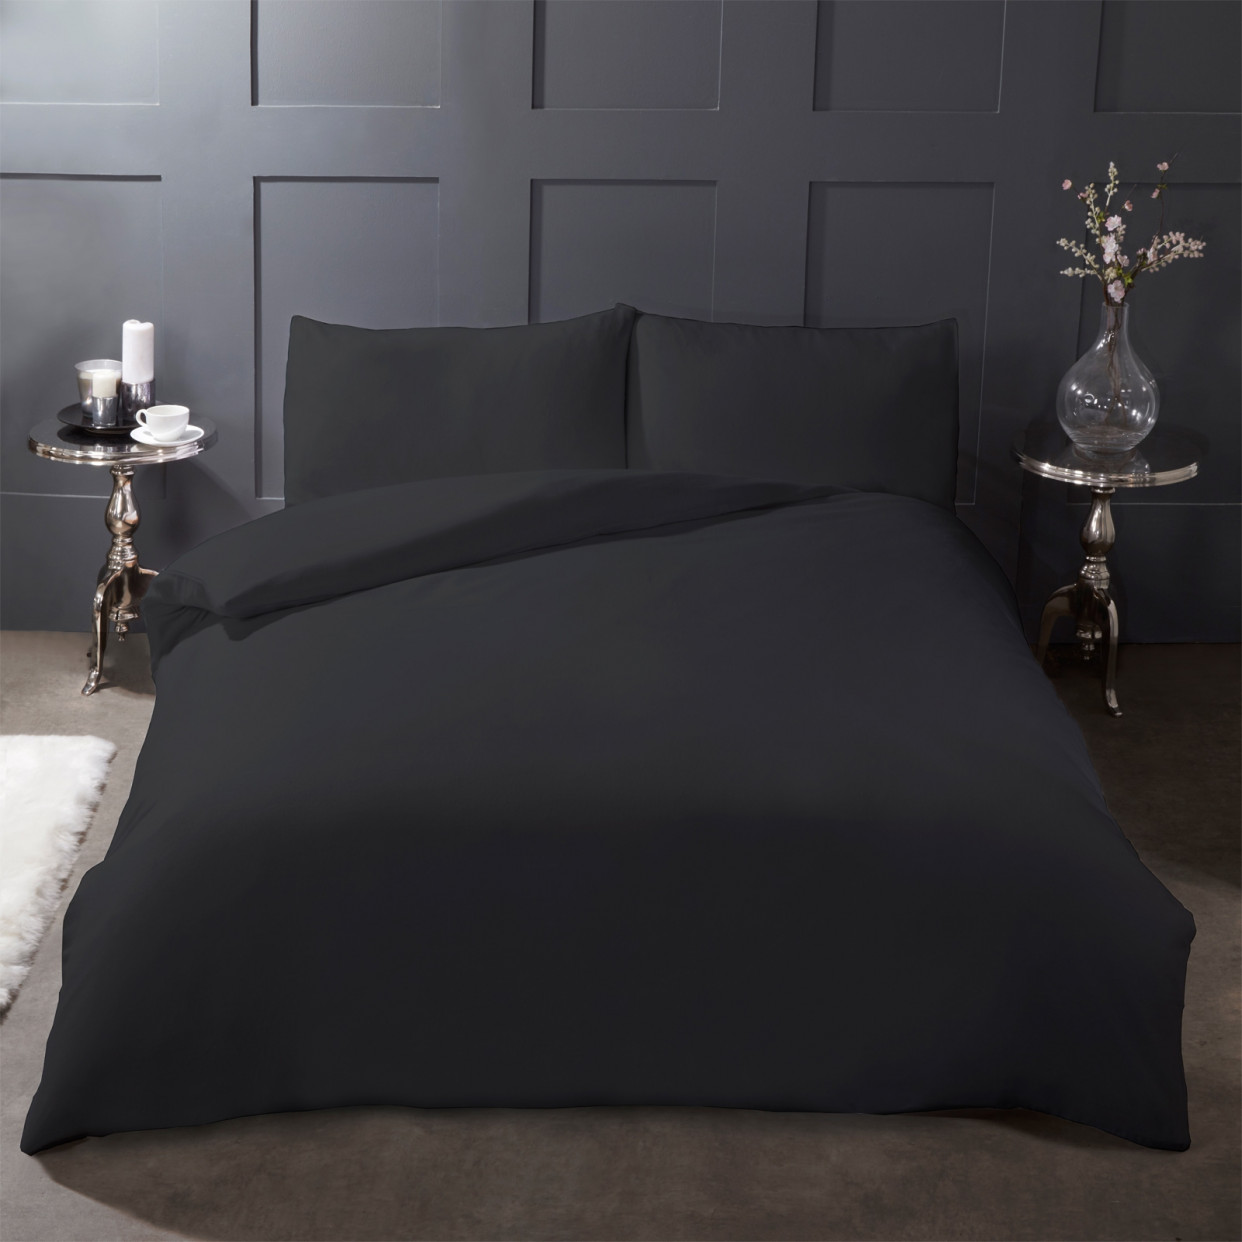 Highams 100% Brushed Cotton Duvet Cover with Pillowcase Flannelette Thermal Bedding Set, Plain Charcoal Black - King>